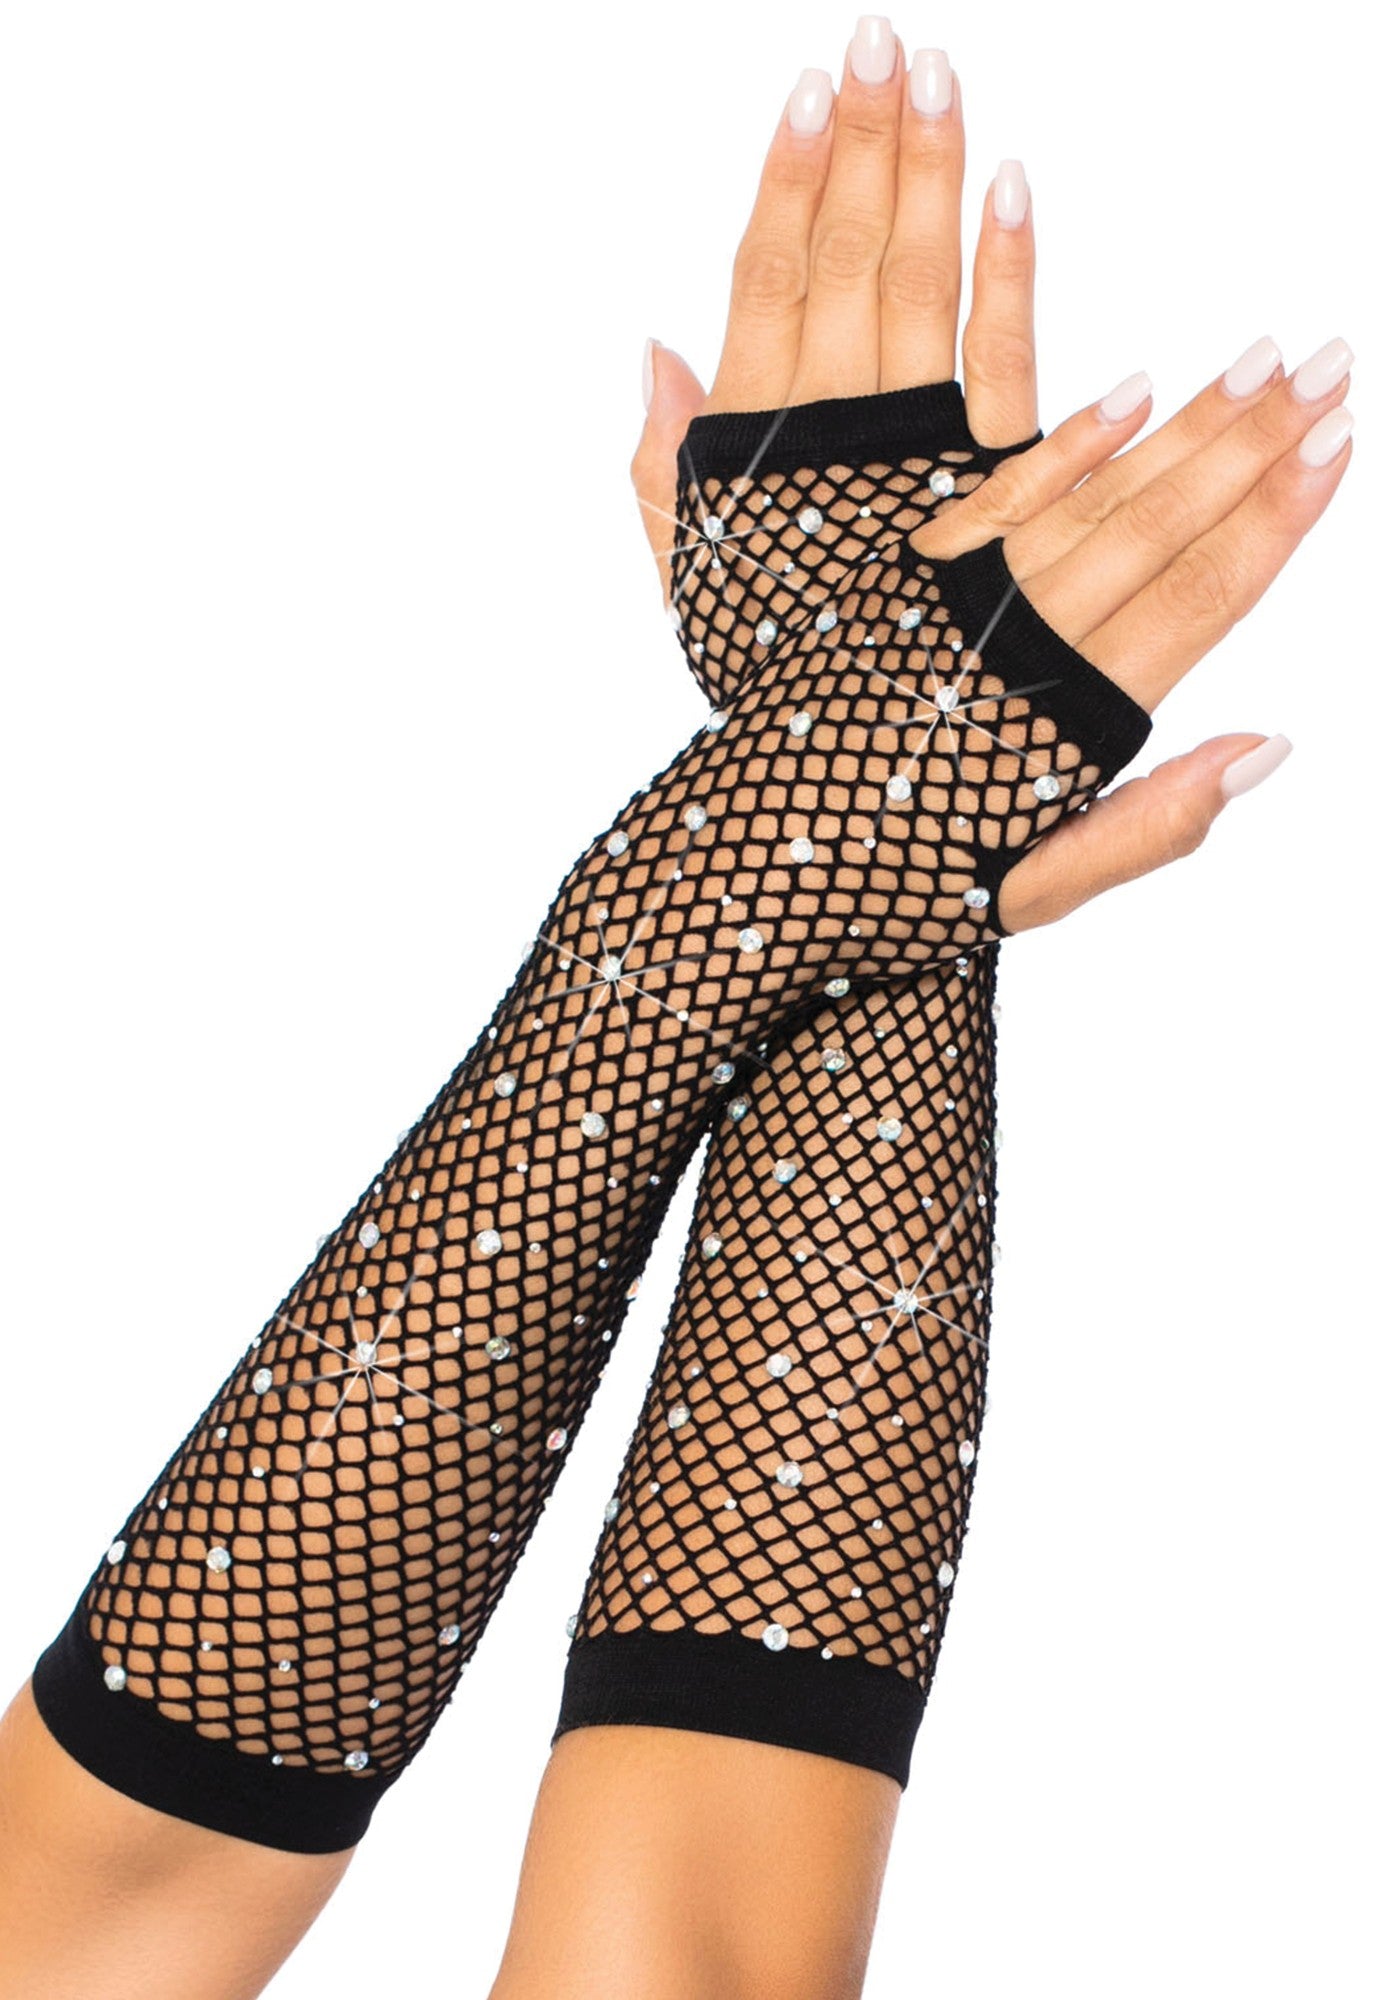 Leg Avenue 2037 Rhinestone Arm Warmers - Fingerless long netted elbow length gloves with sparkly diamante' crystals dotted all over.